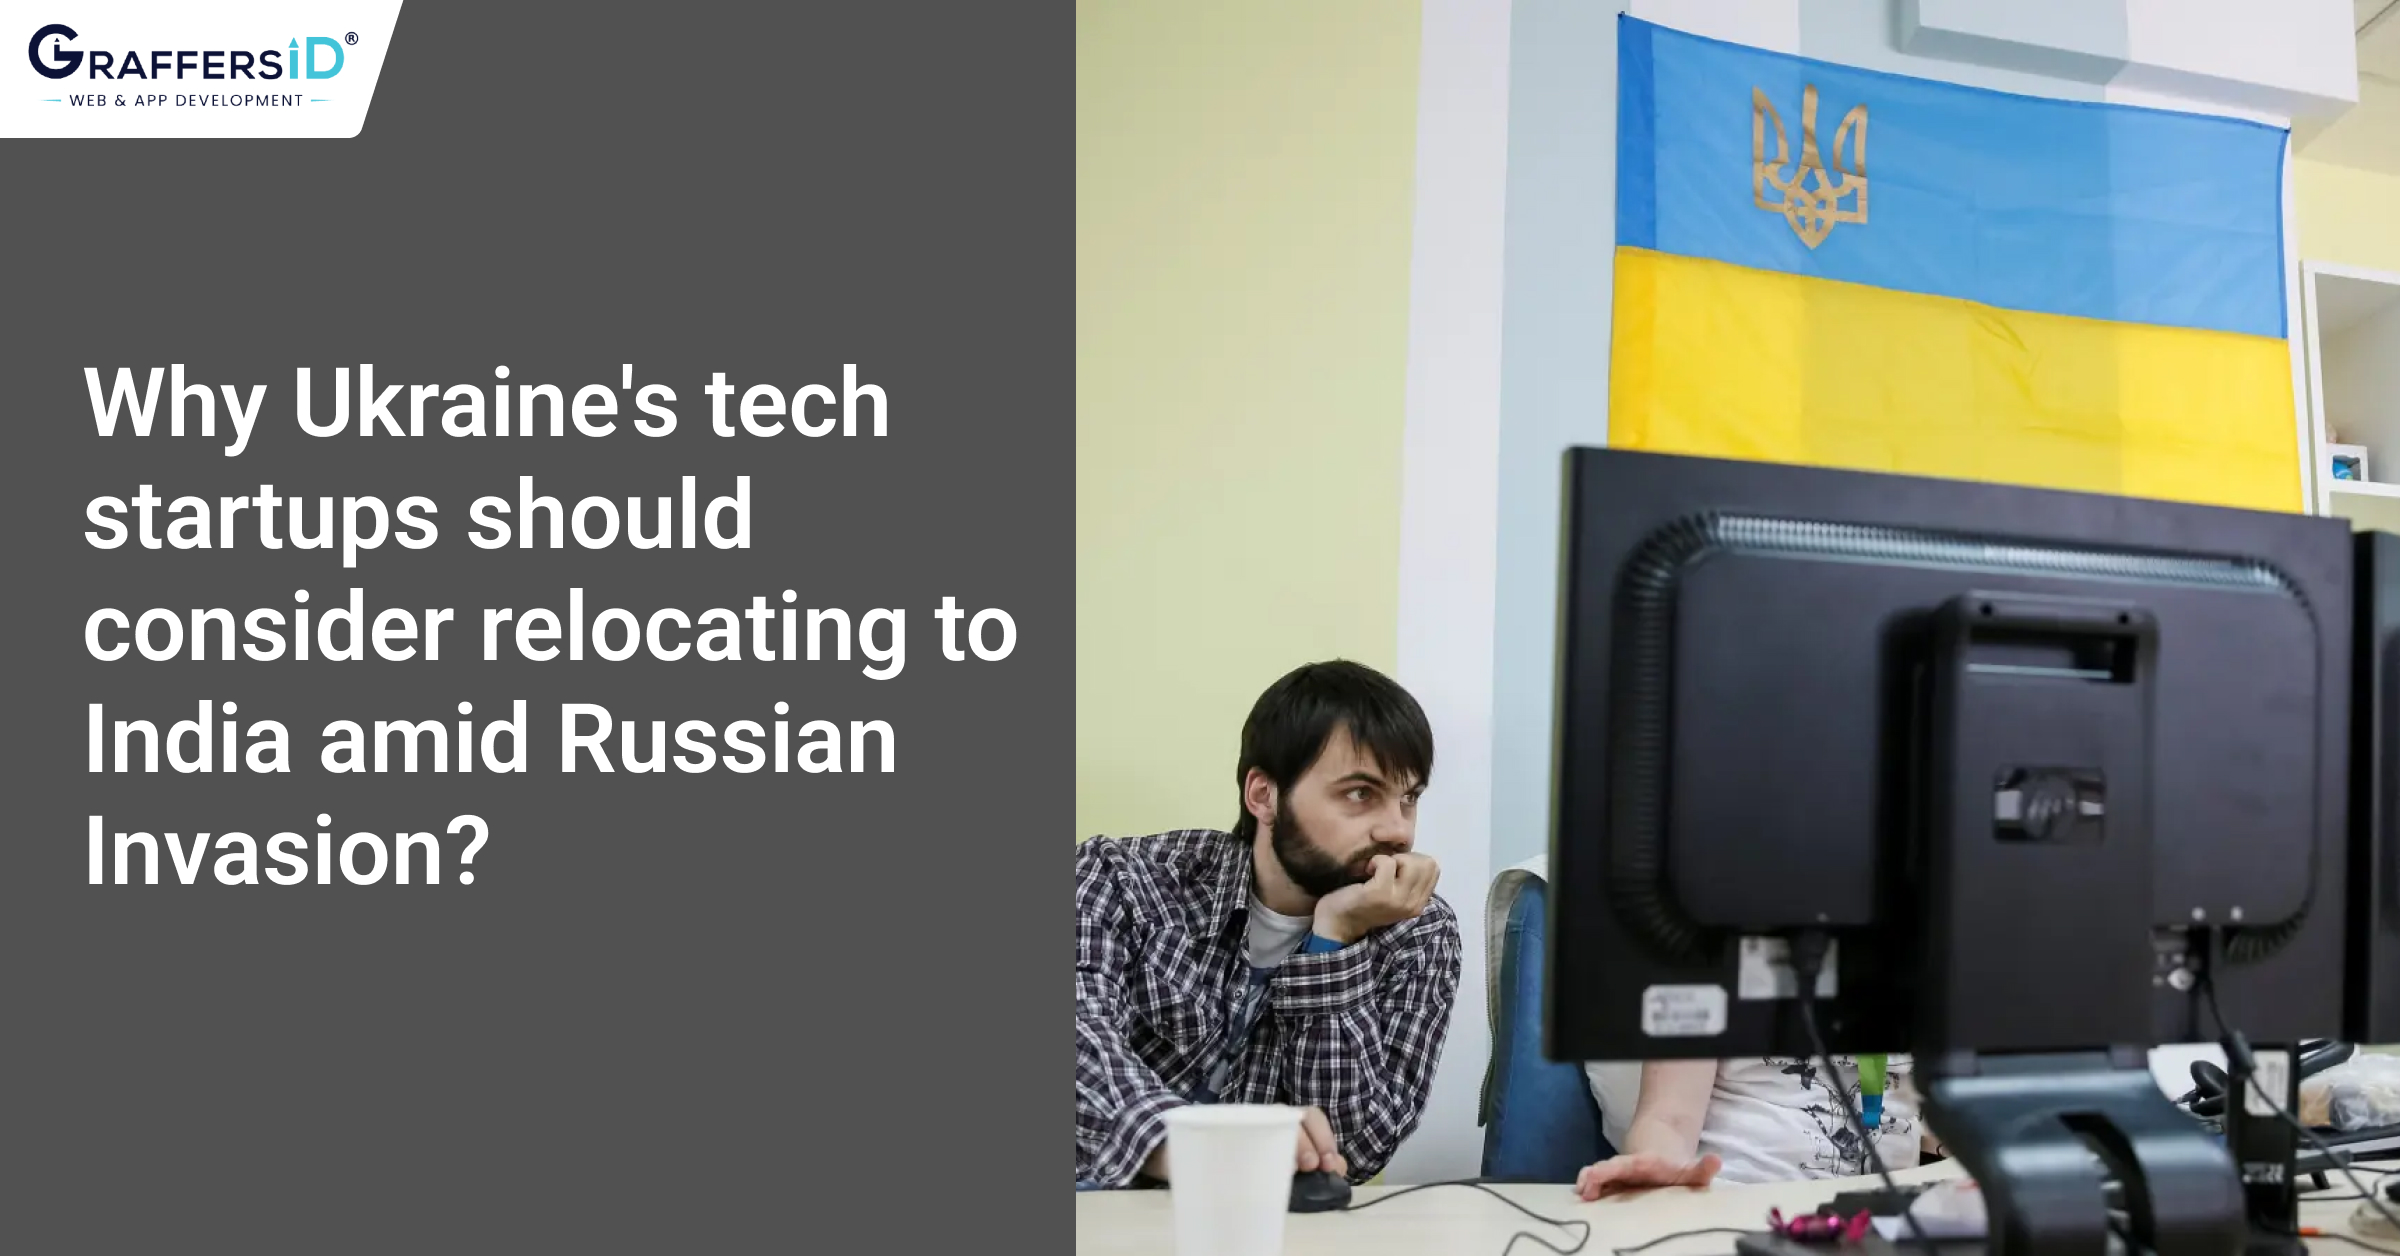 Why Ukraine’s tech startups should consider relocating to India amid Russian Invasion?